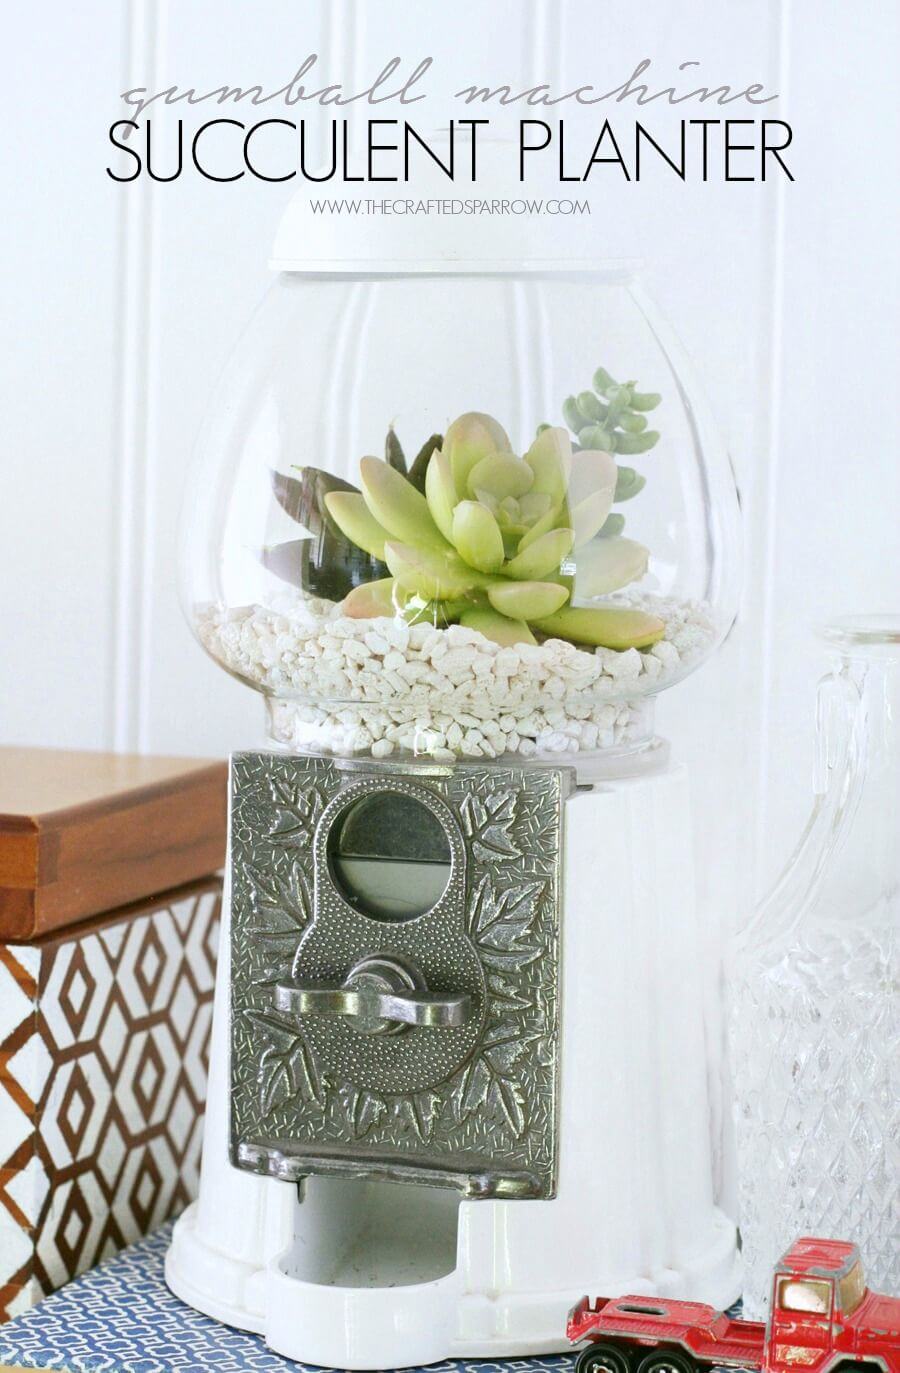 Whimsical Gumball Machine Succulent Planter